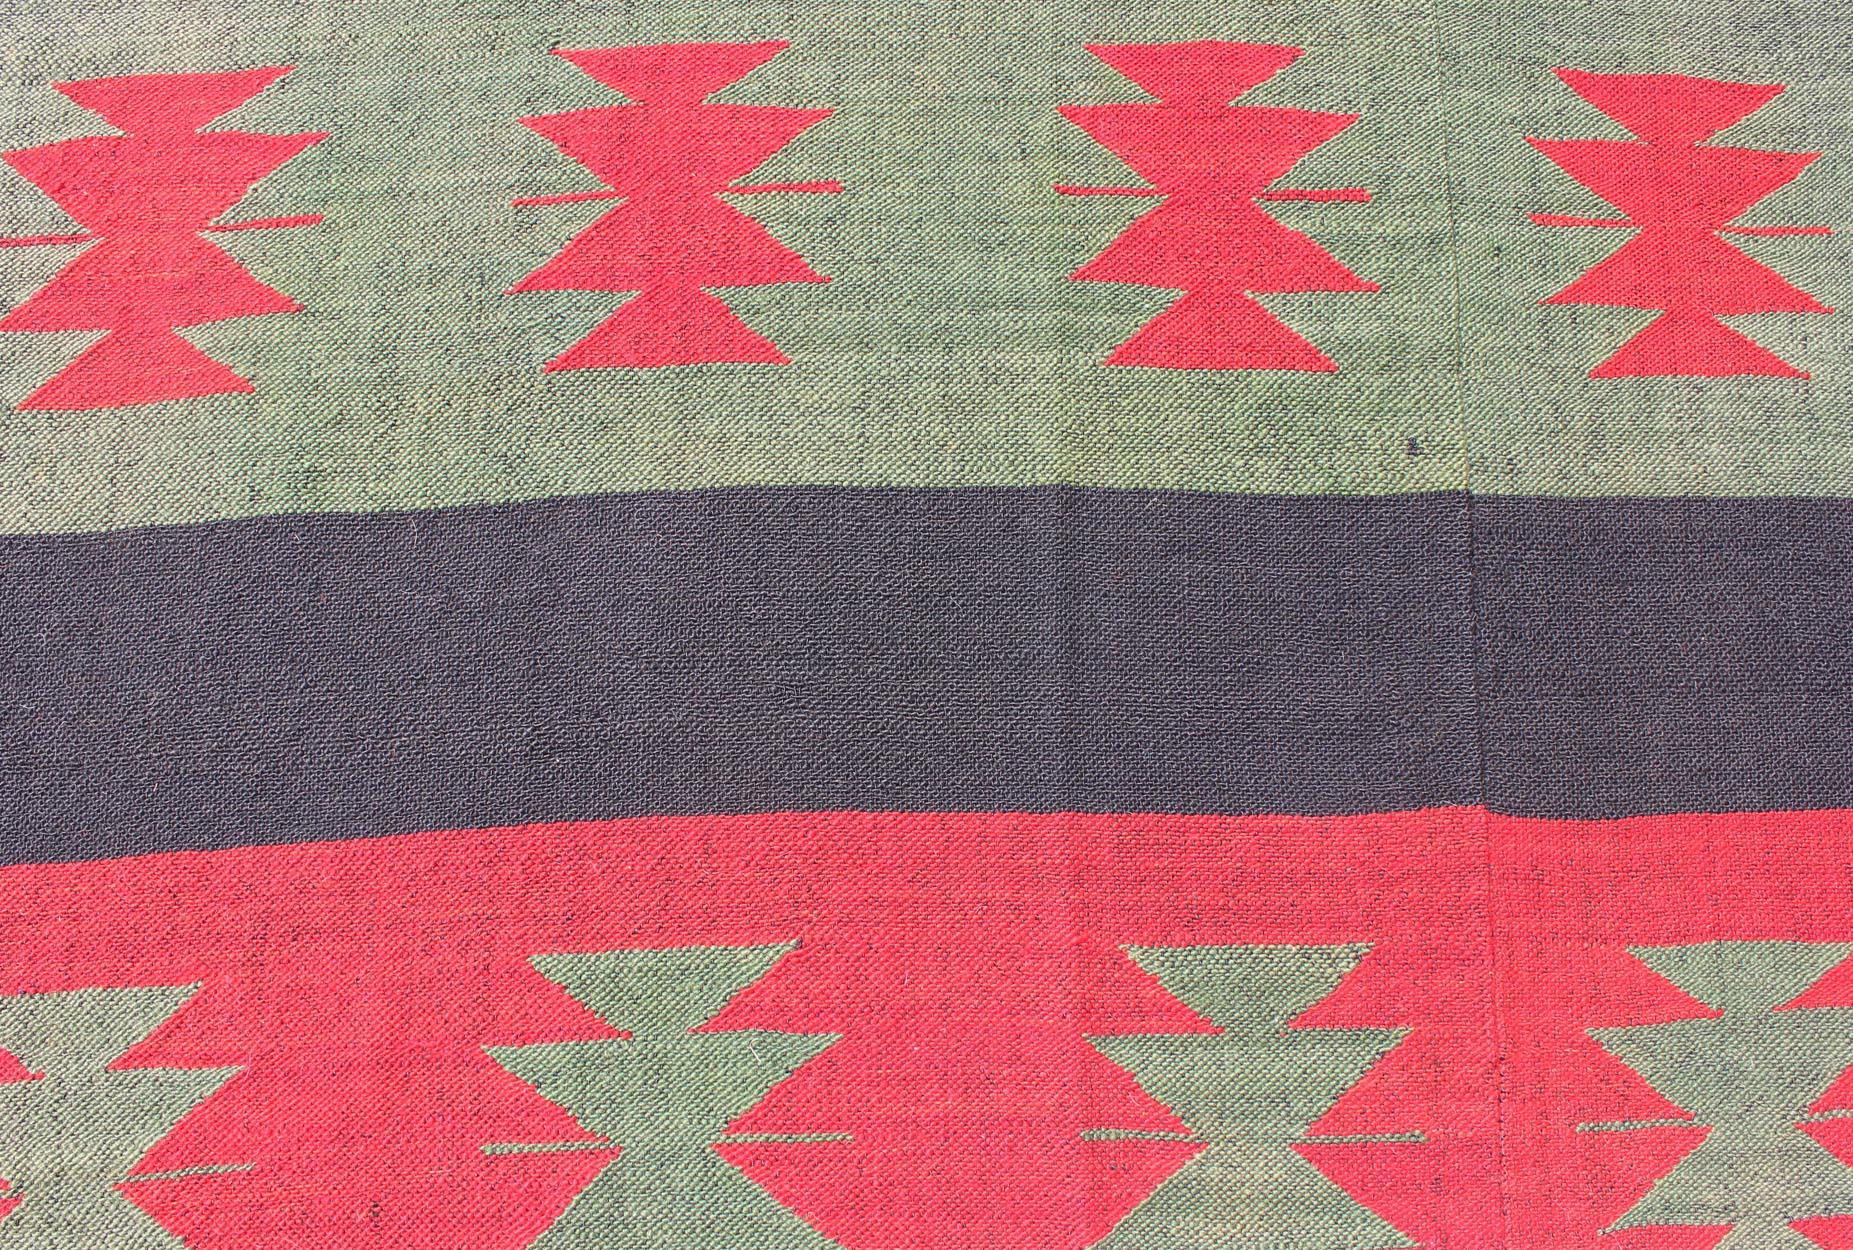 Hand-Woven Large Vintage Kilim Rug with Tribal Shapes and Stripes in Red, Brown and Green For Sale